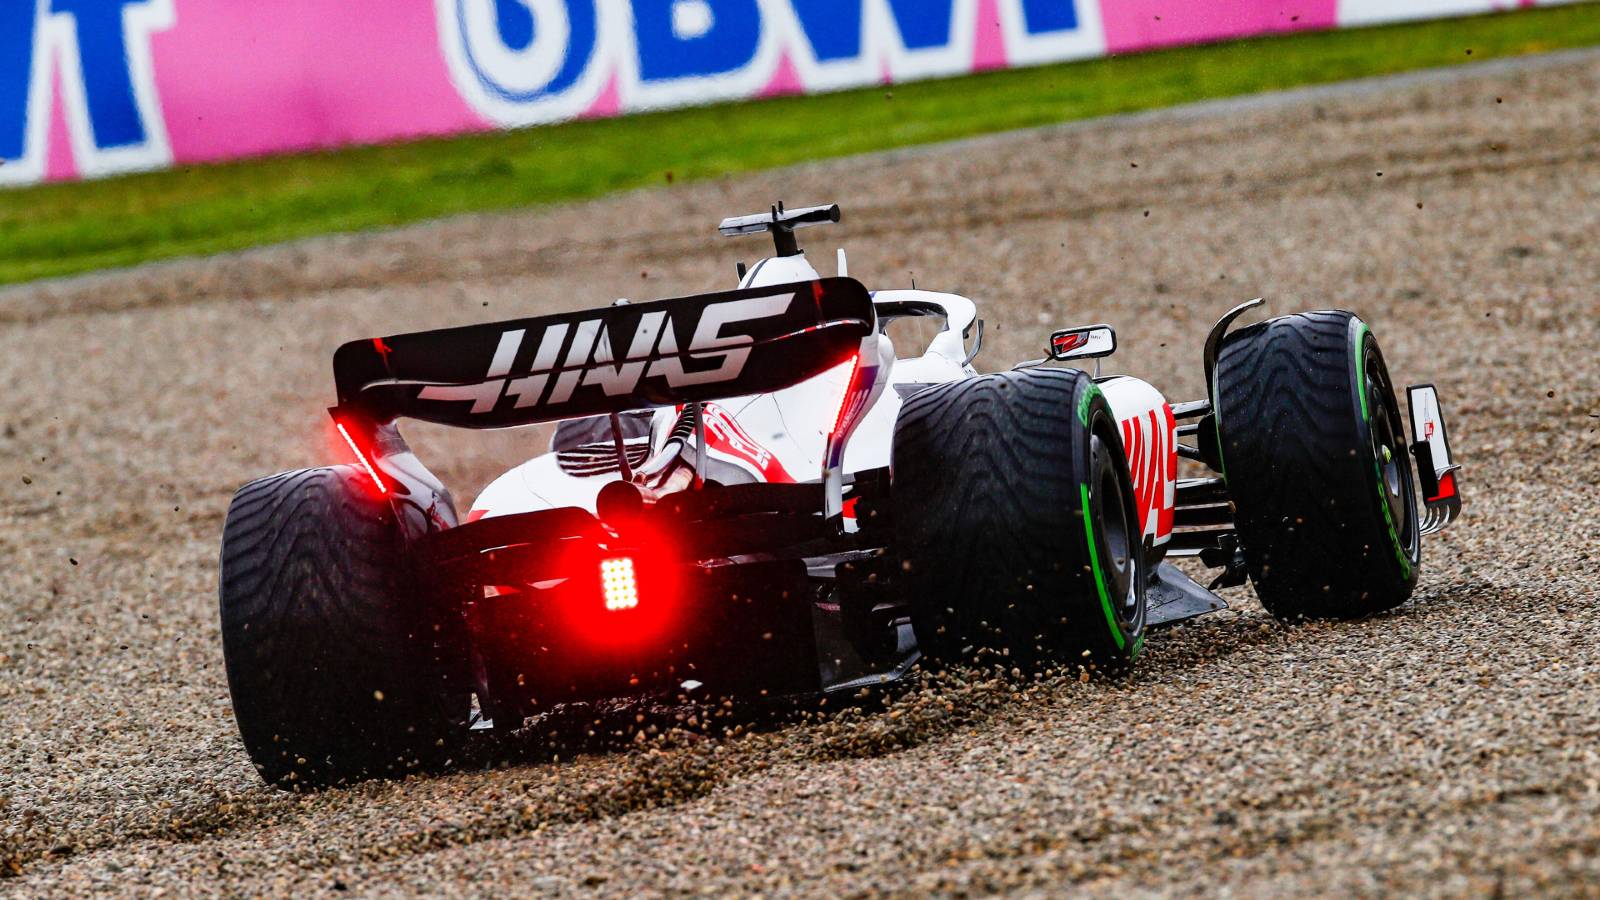 Kevin Magnussen's Haas in the gravel. Imola April 2022.